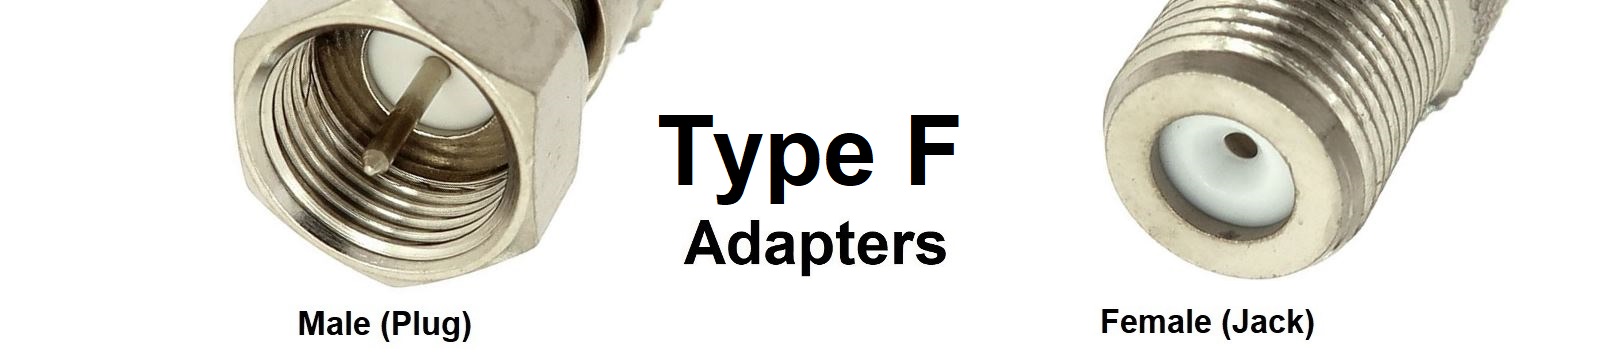 Type F Adapters Category Banner - Max-Gain Systems, Inc.